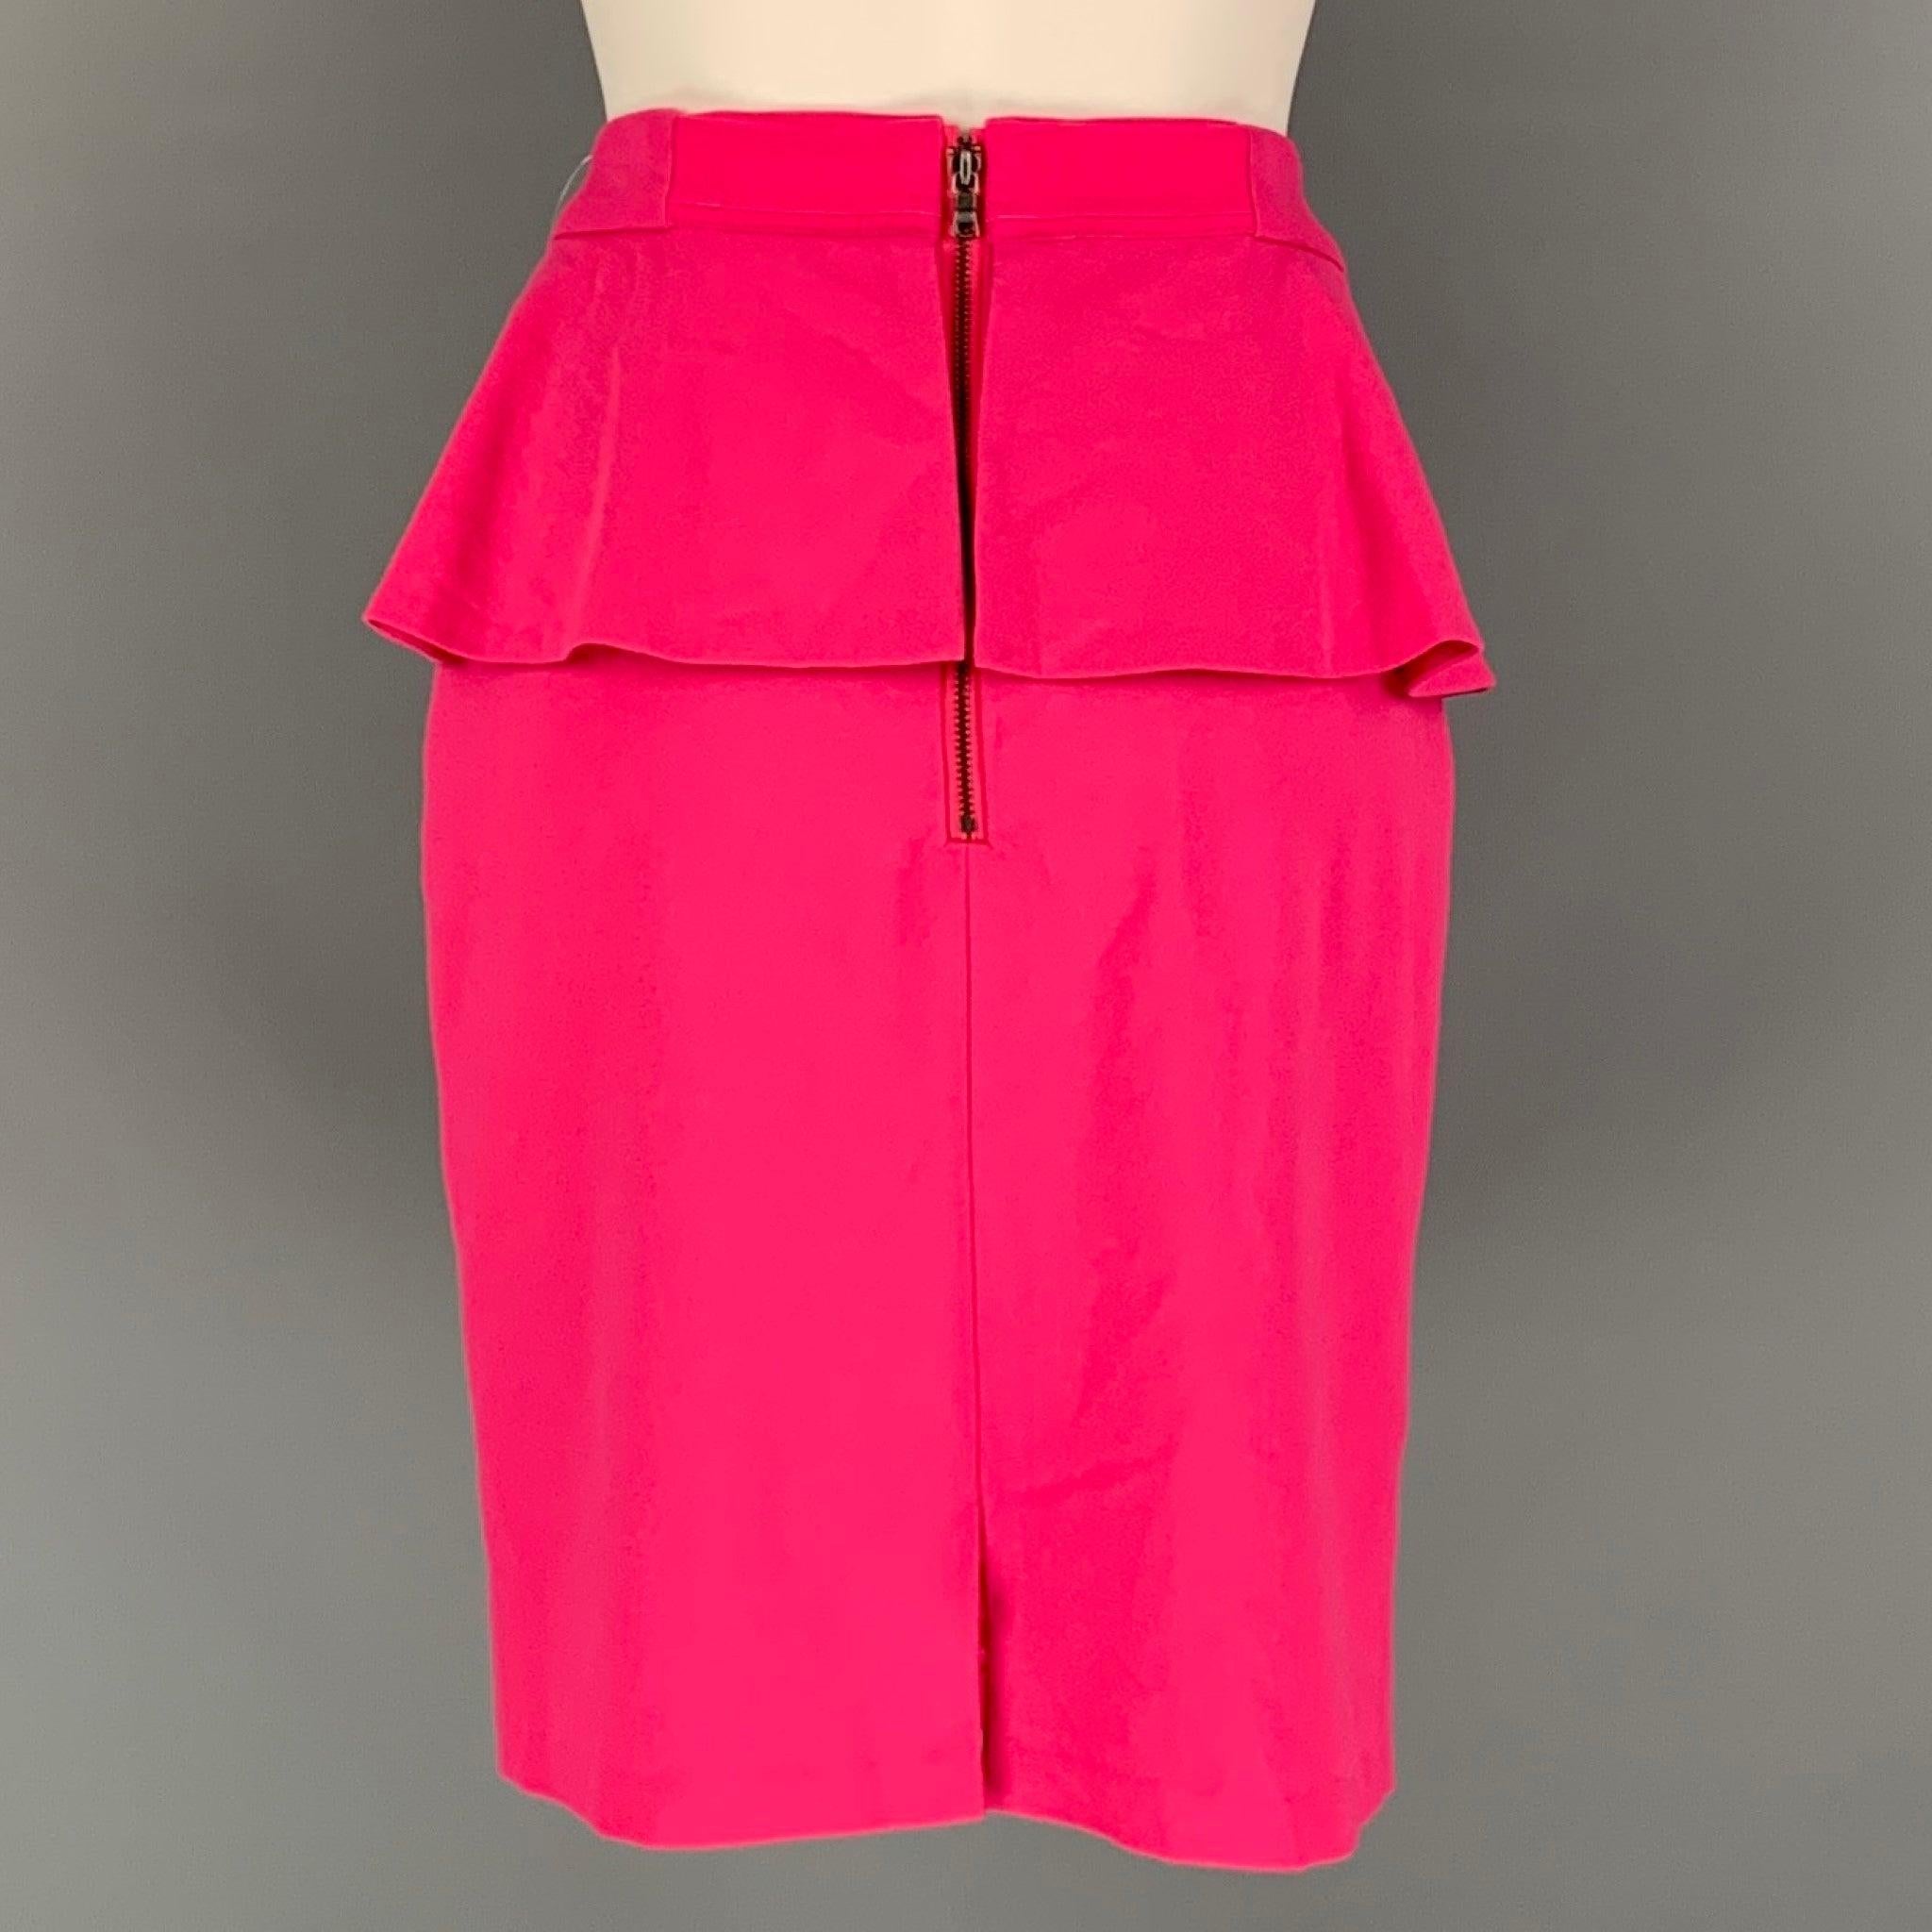 ALICE + OLIVIA skirt comes in a pink polyester blend knit material featuring peplum style, and zip up closure at center back.Excellent Pre-Owned Condition. 

Marked:   8 

Measurements: 
  Waist: 30.5 inHip: 40 inches Length: 21 inches 
 
 

  
  
